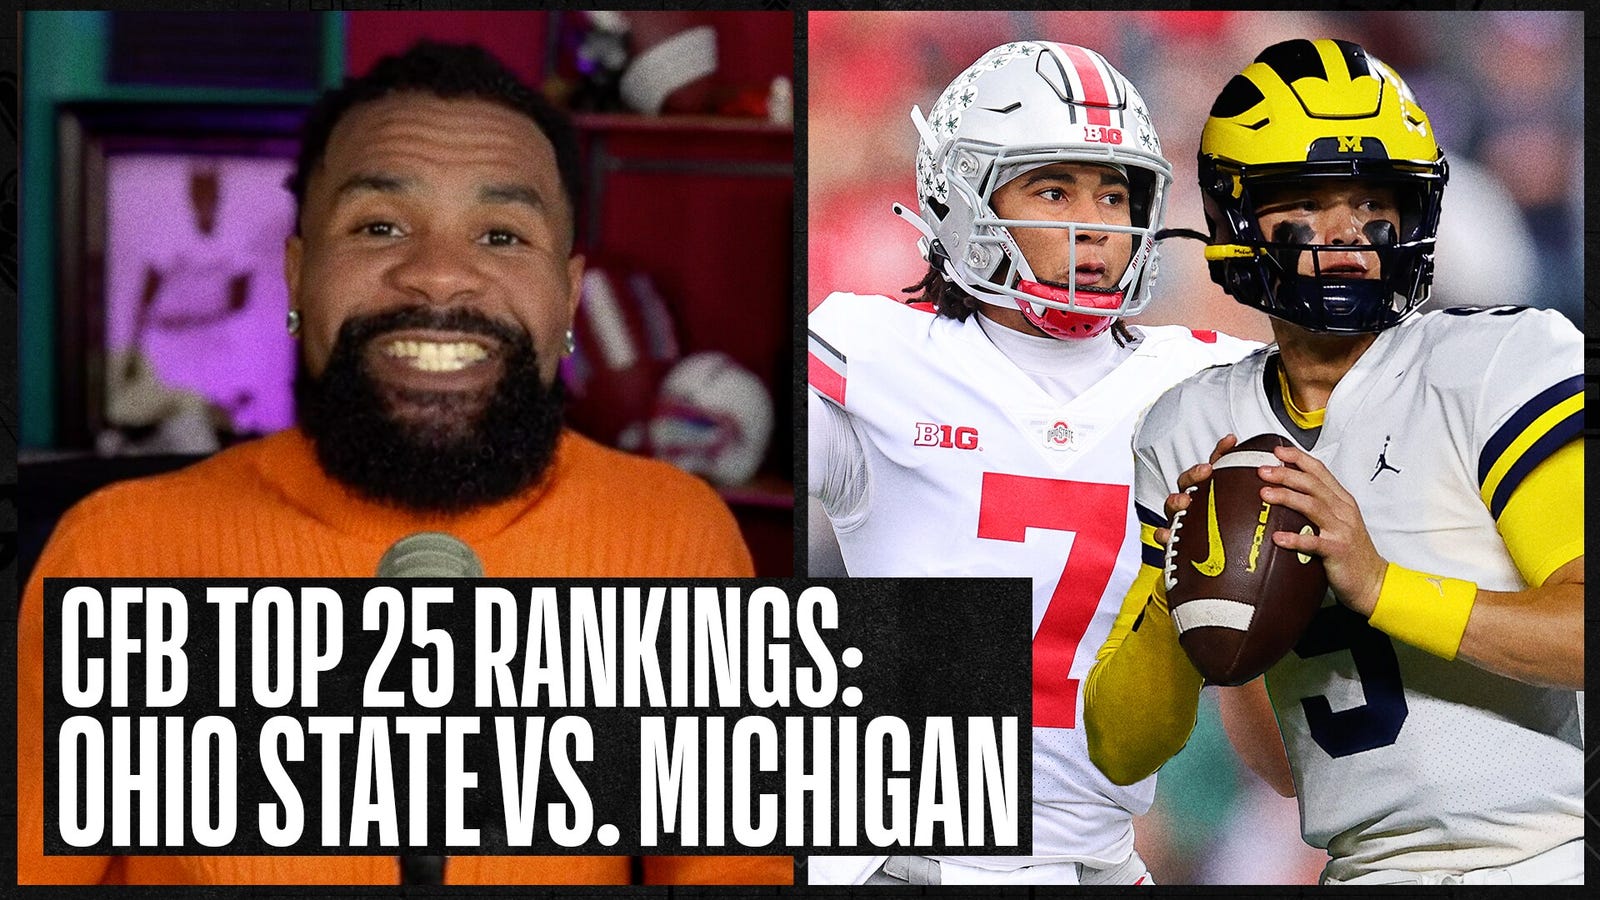 Ohio State and Michigan are on a collision course